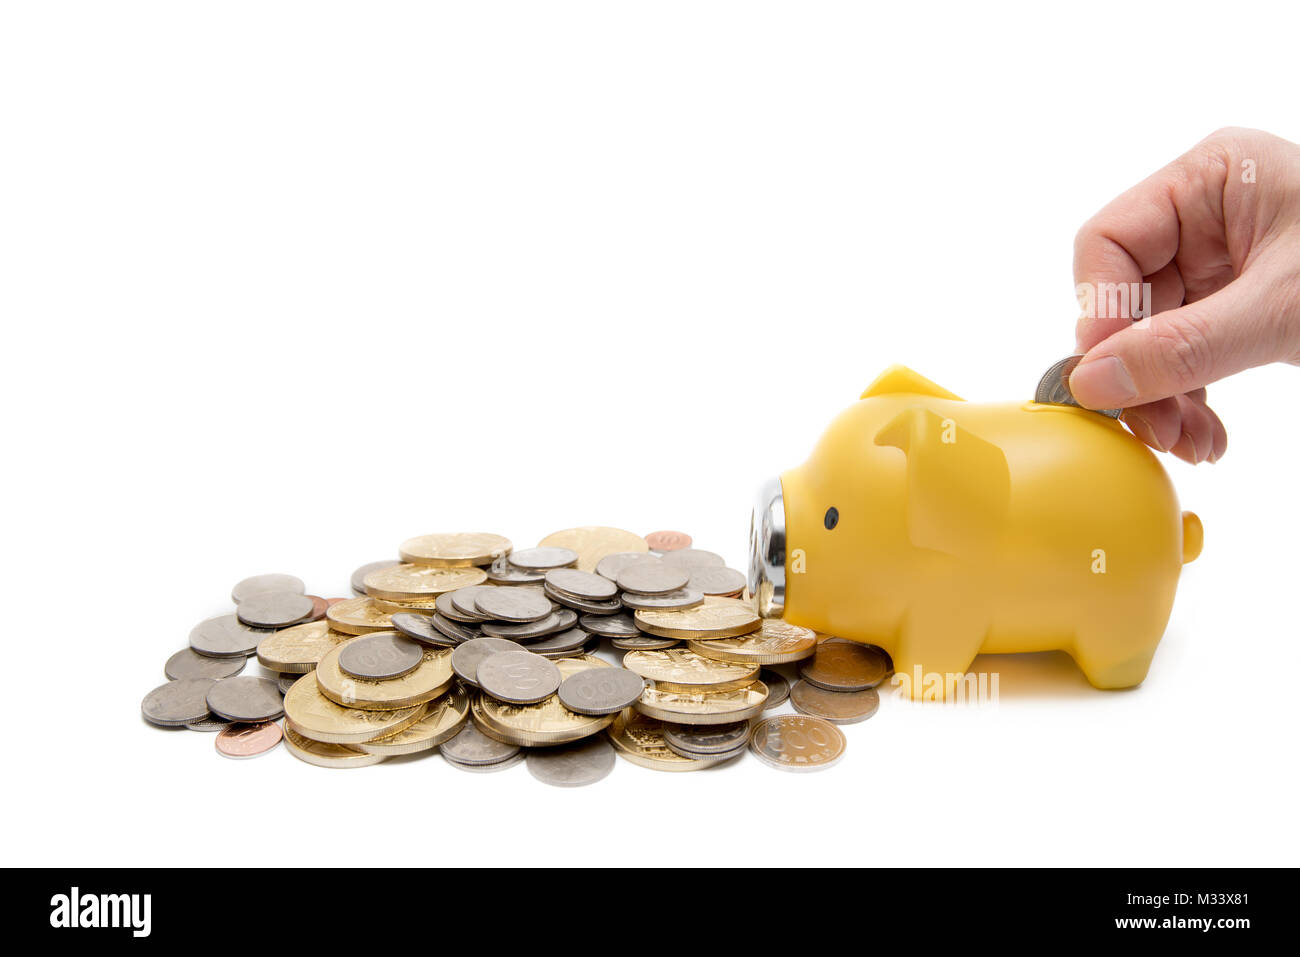 Coins and Piggy banks, Economic Concepts. Isolated. Stock Photo